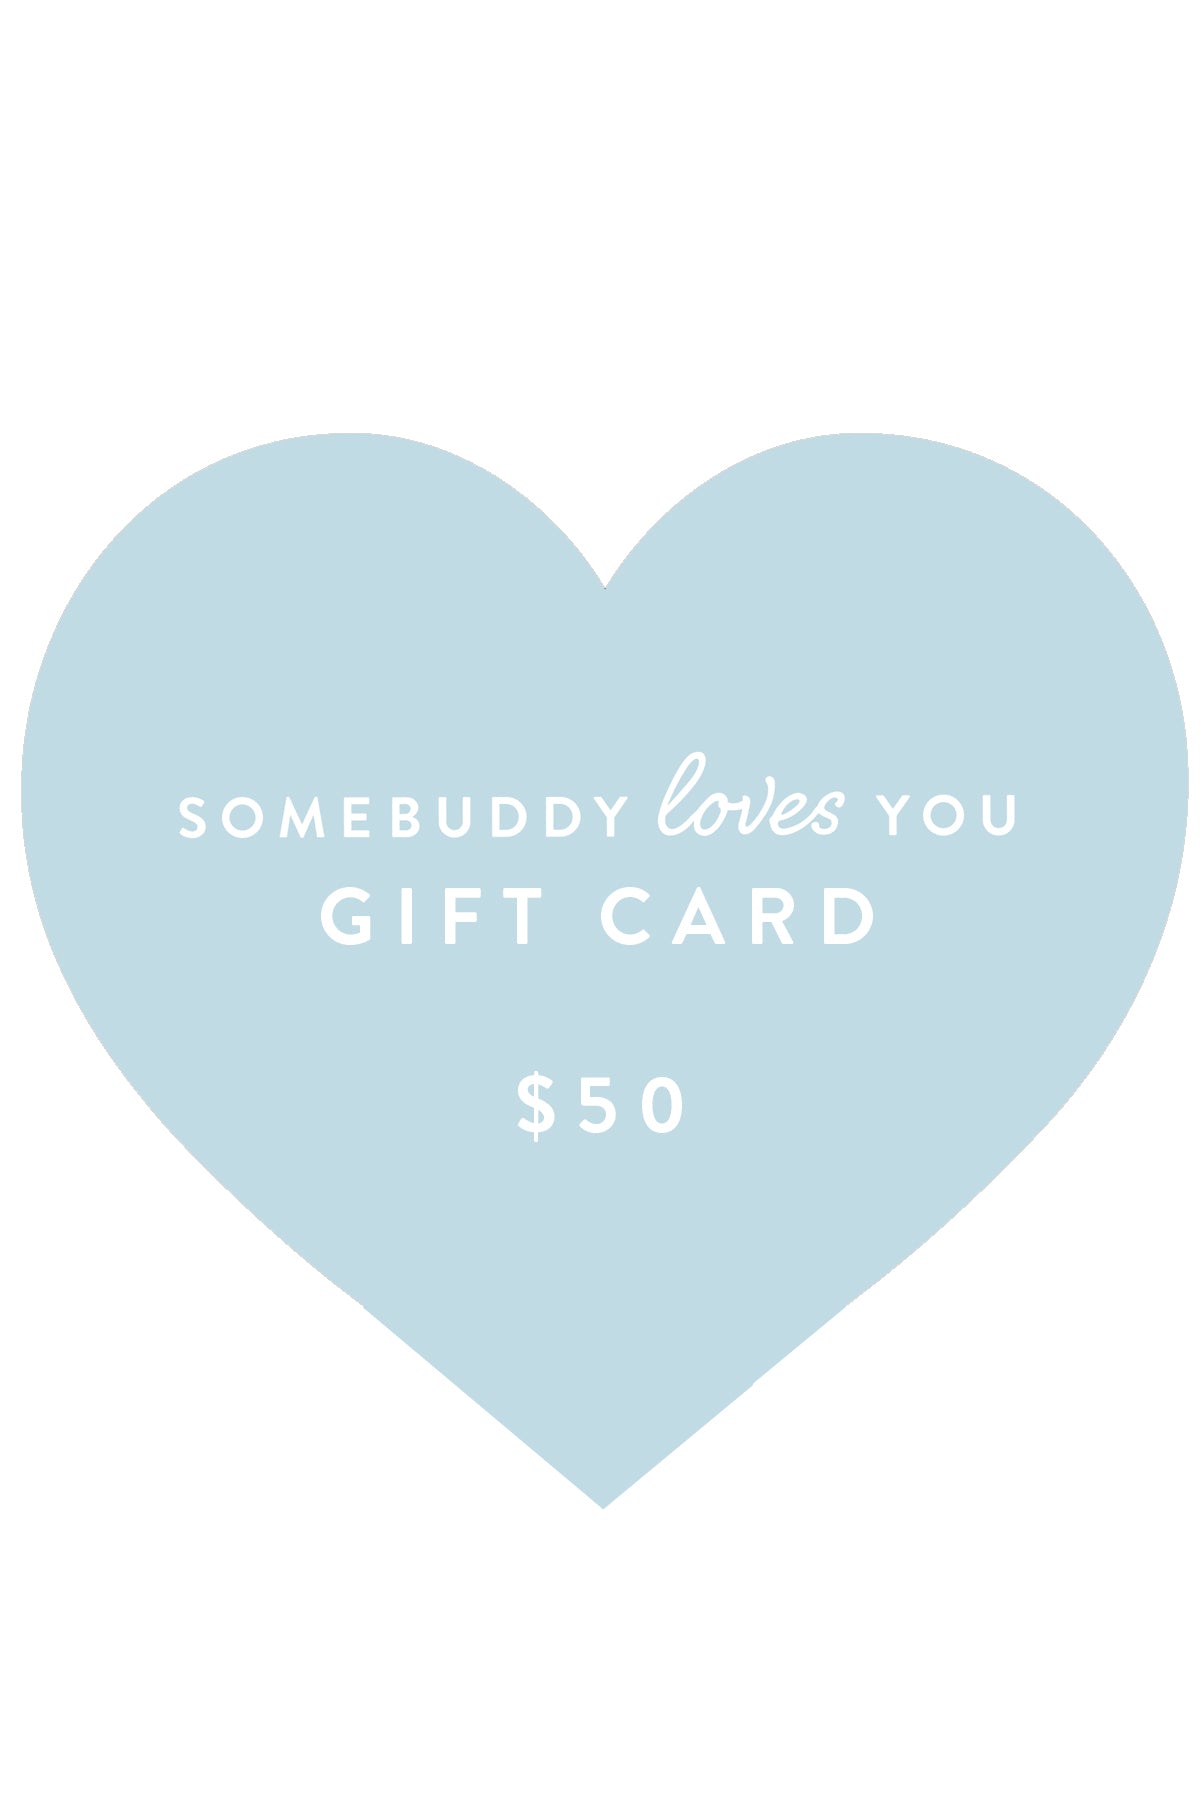 Somebuddy Loves You Gift Card $50